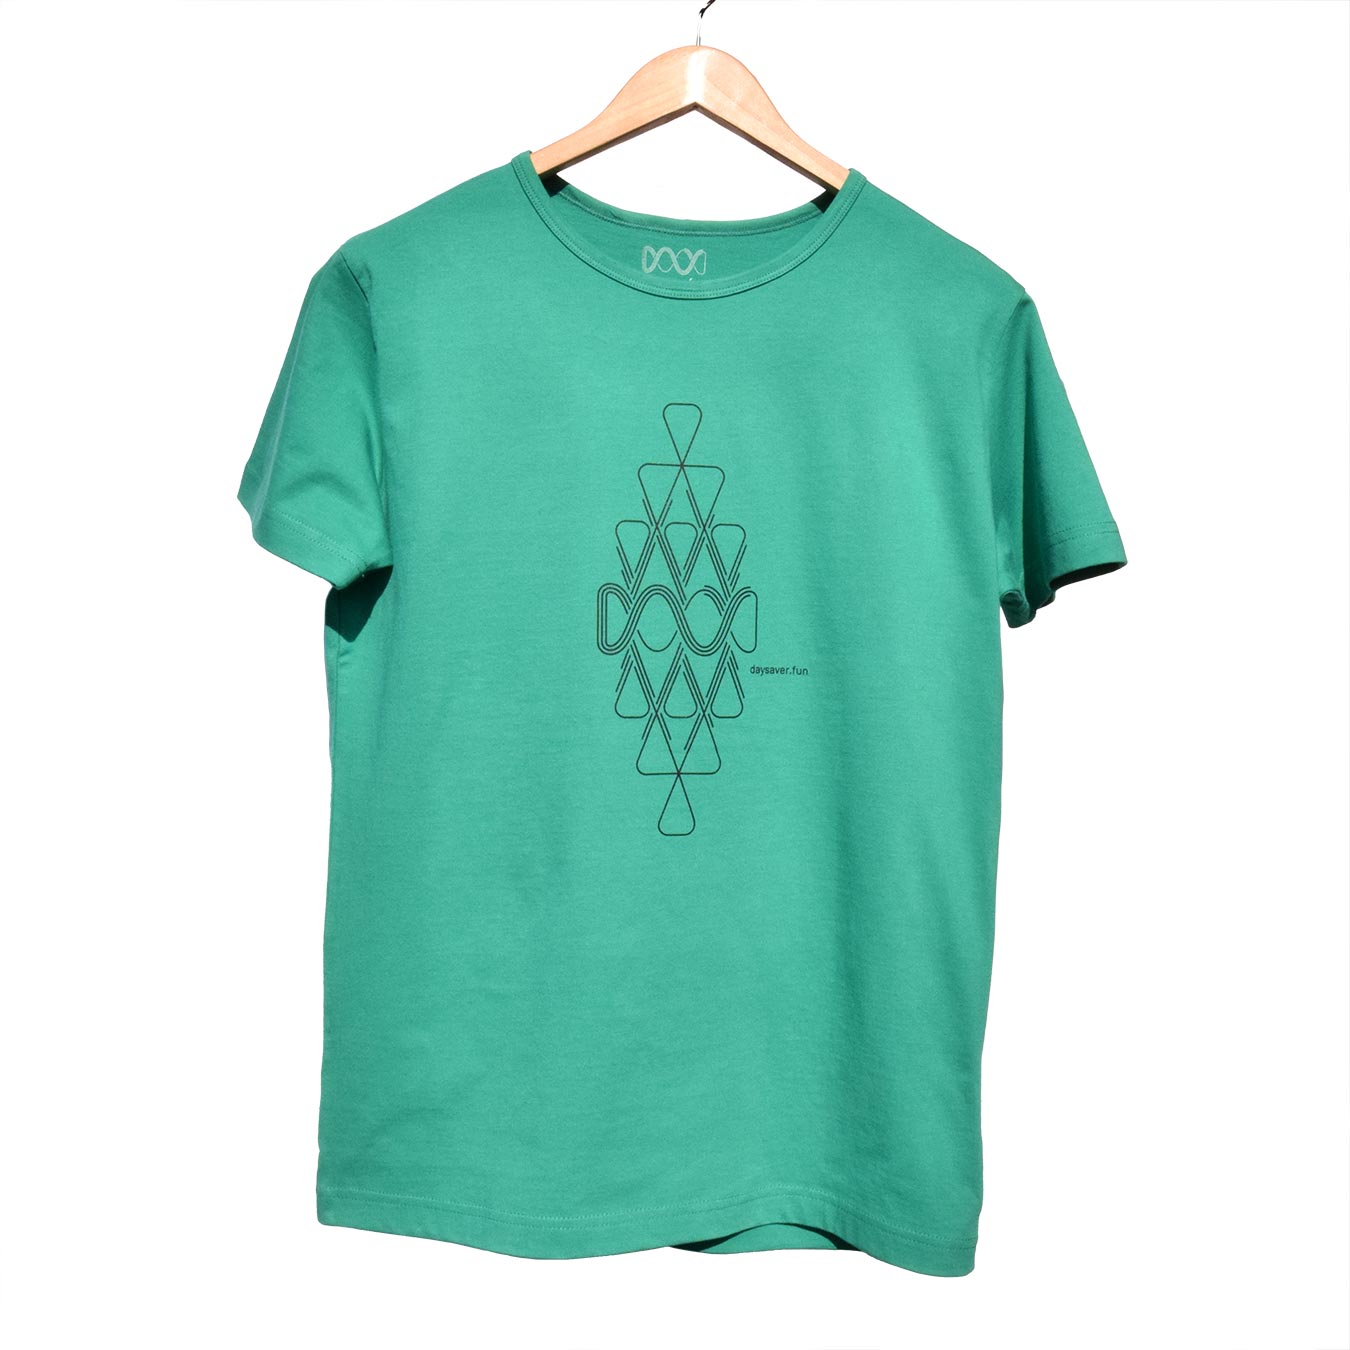 T-Shirt green with pattern print